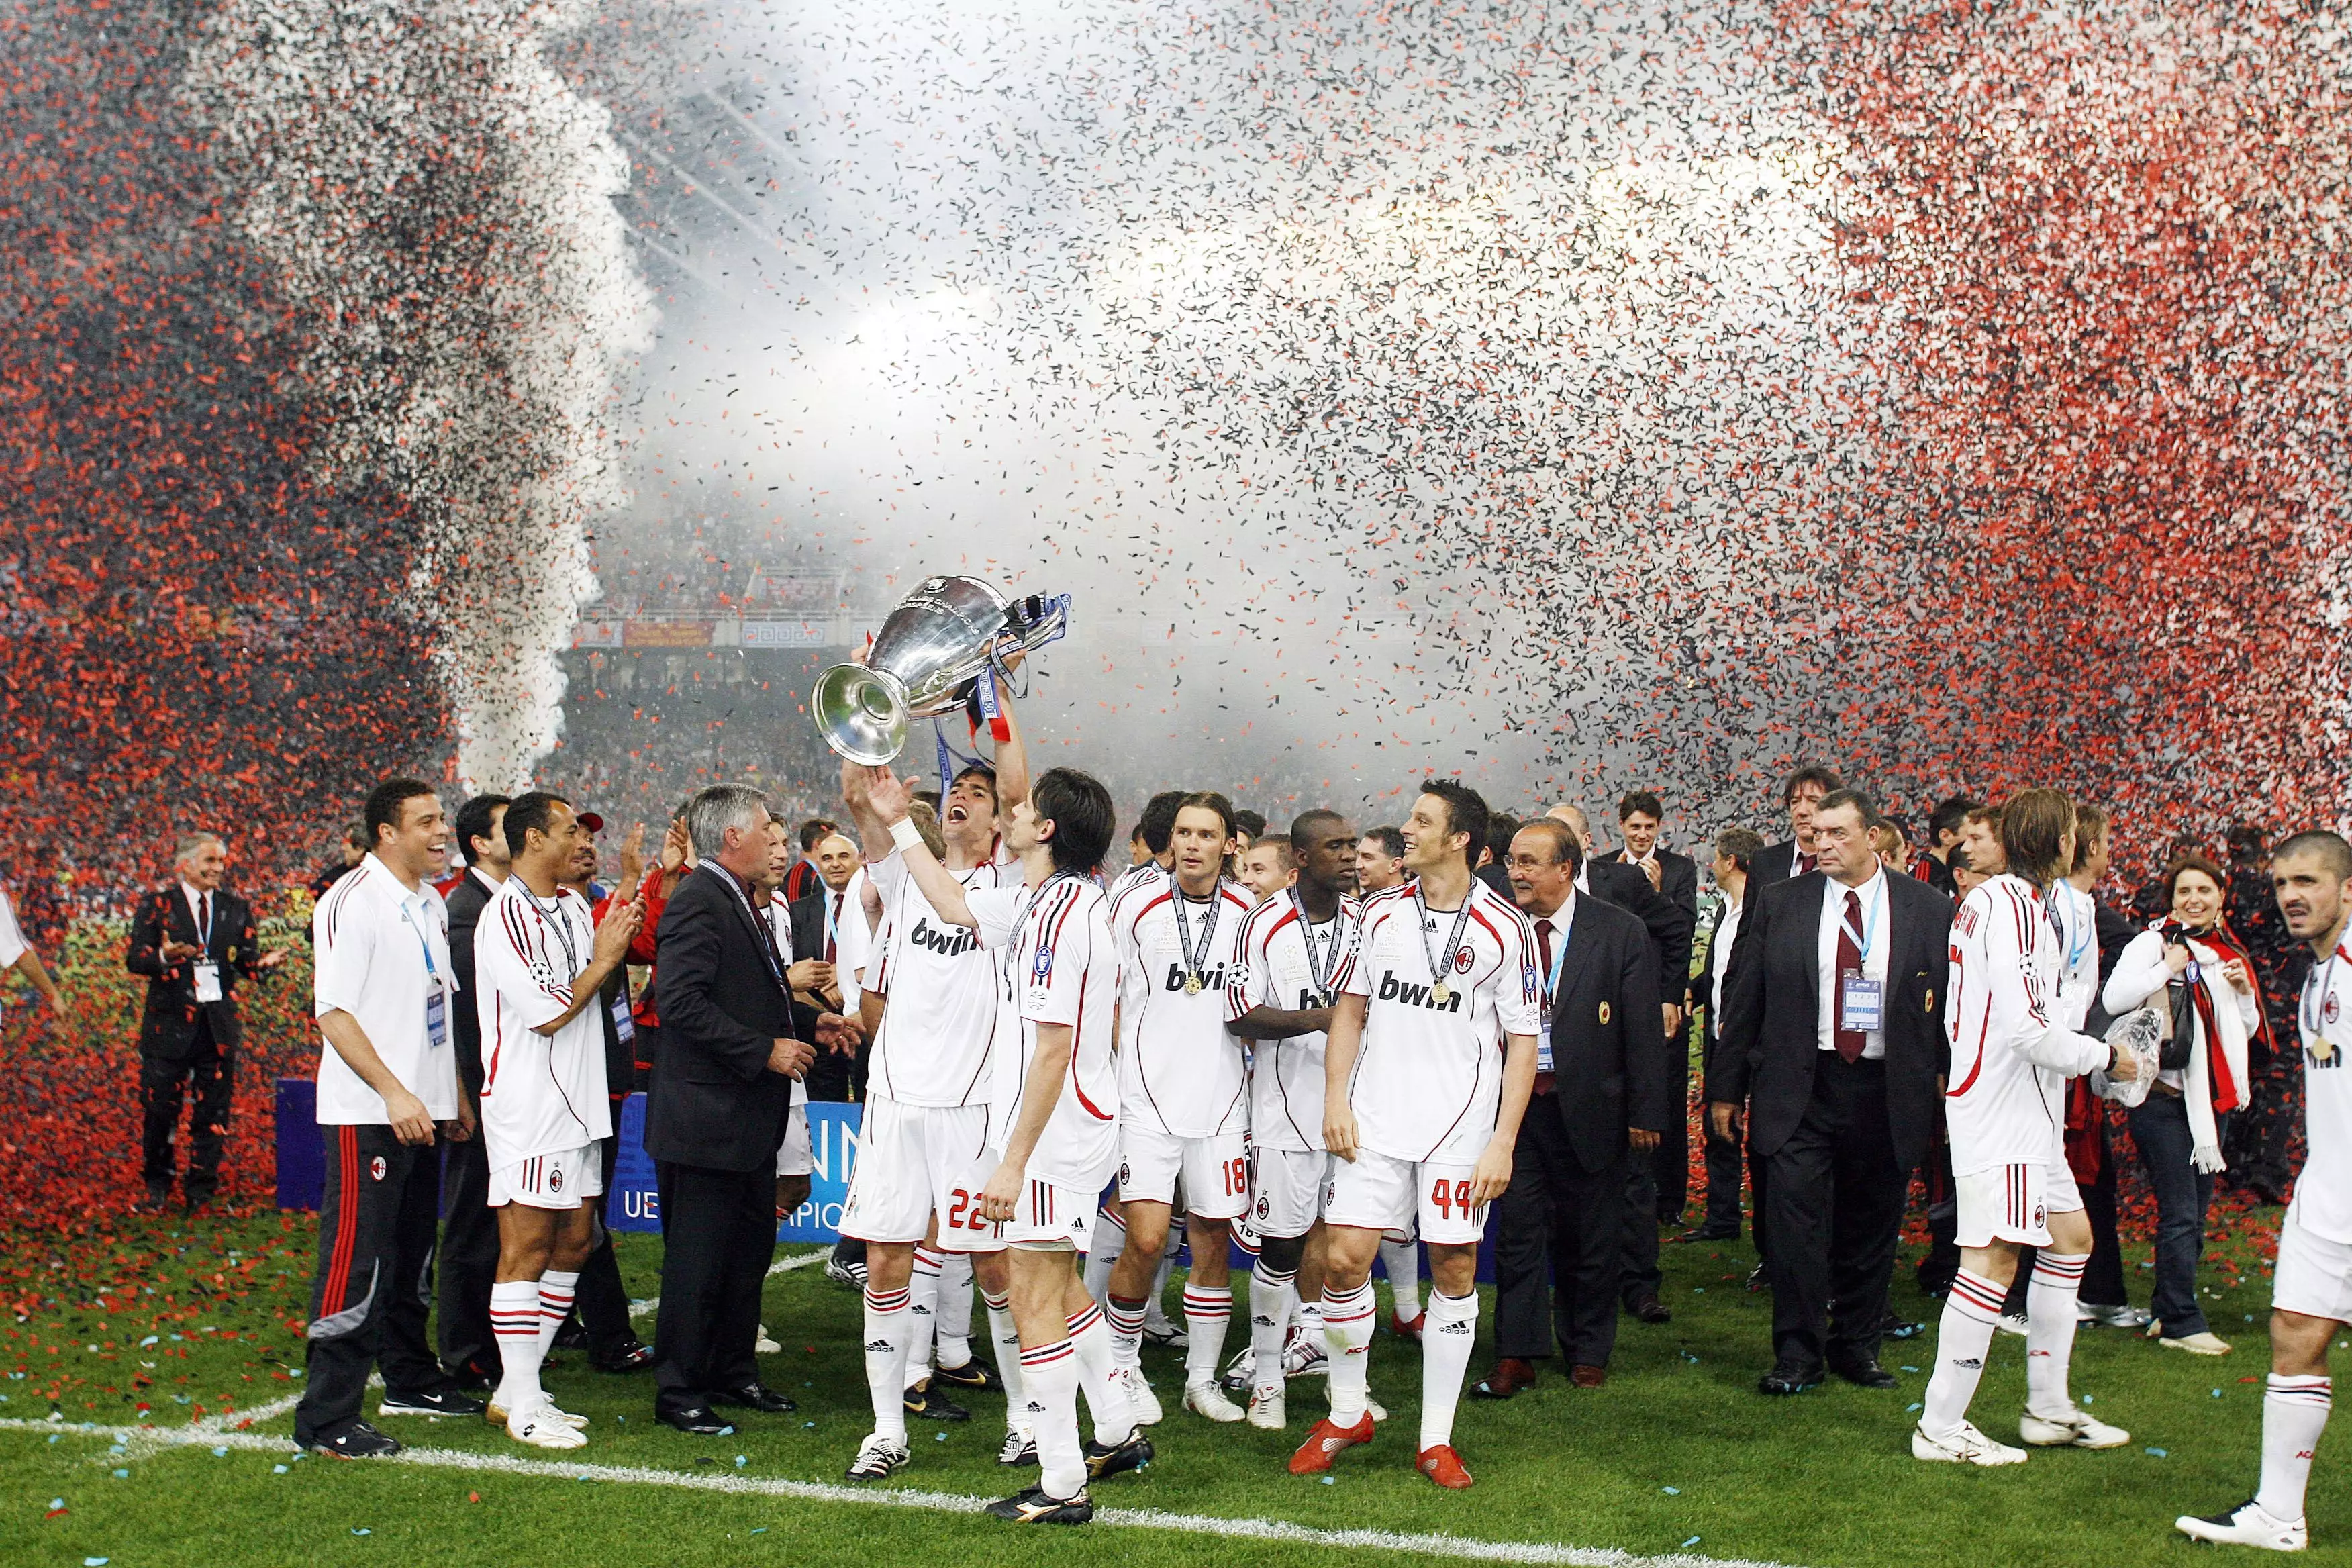 After beating United, Milan went on to win the Champions League in Athens. Image: PA Images